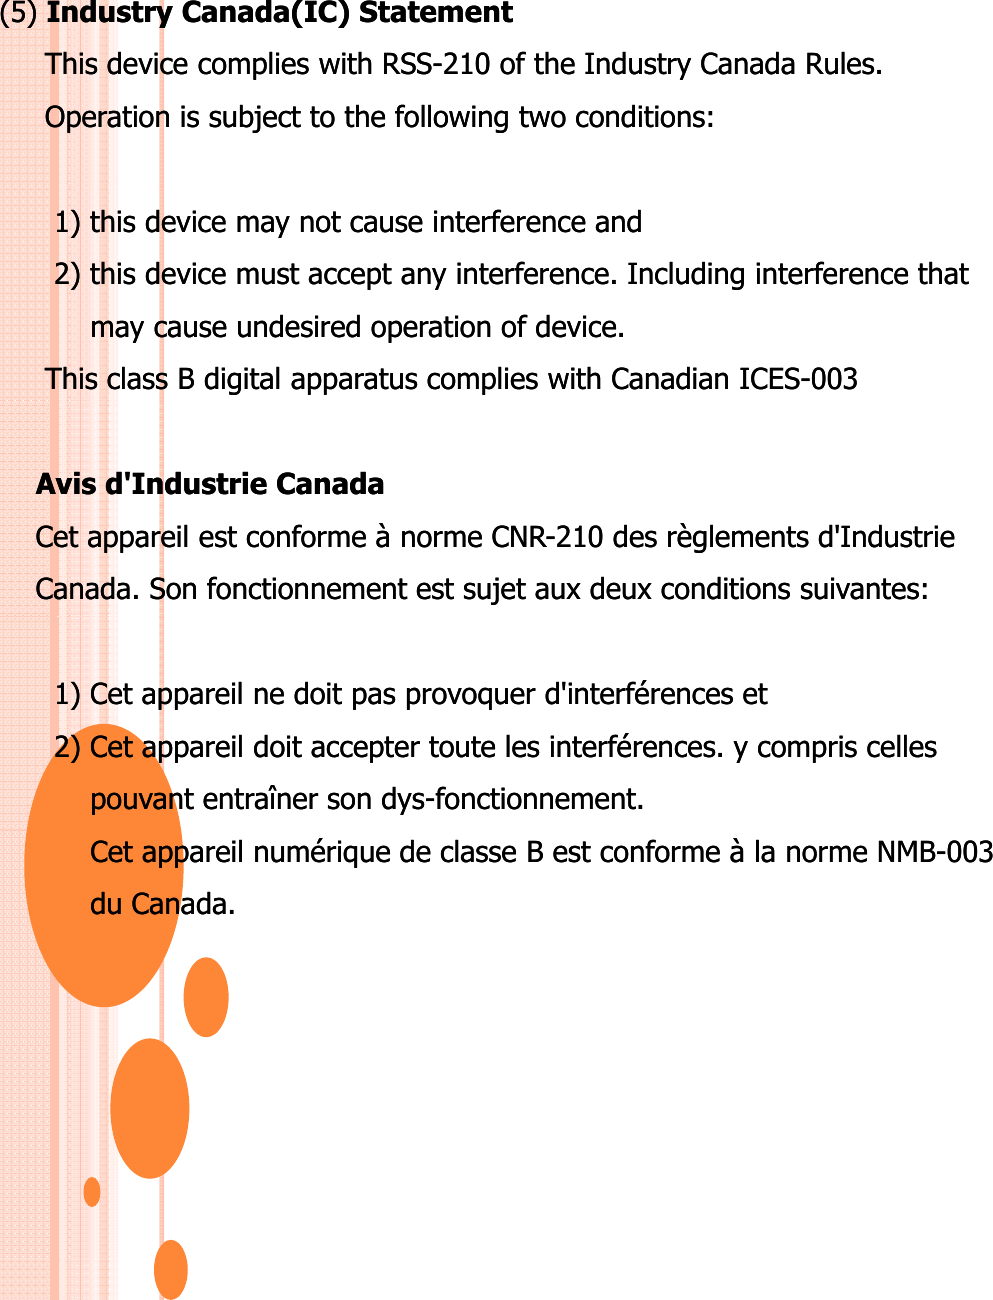 (5) (5) Industry Canada(IC) StatementIndustry Canada(IC) StatementThis device complies with RSSThis device complies with RSS--210 of the Industry Canada Rules.210 of the Industry Canada Rules.Operation is subject to the following two conditions:Operation is subject to the following two conditions:1) this device may not cause interference and1) this device may not cause interference and2) this device must accept any interference. Including interference that  2) this device must accept any interference. Including interference that  may cause undesired operation of device.may cause undesired operation of device.This class B digital apparatus complies with Canadian ICESThis class B digital apparatus complies with Canadian ICES--003003Avis Avis d&apos;Industried&apos;Industrie CanadaCanadaCet appareil est conforme à norme CNRCet appareil est conforme à norme CNR--210 des règlements d&apos;Industrie  210 des règlements d&apos;Industrie  Canada. Son fonctionnement est sujet aux deux conditions suivantes:Canada. Son fonctionnement est sujet aux deux conditions suivantes:1) Cet appareil ne doit pas provoquer d&apos;interférences et1) Cet appareil ne doit pas provoquer d&apos;interférences et2) Cet appareil doit accepter toute les interférences. y compris celles 2) Cet appareil doit accepter toute les interférences. y compris celles pouvant entraîner son dyspouvant entraîner son dys--fonctionnement.fonctionnement.Cet appareil numérique de classe B est conforme à la norme NMBCet appareil numérique de classe B est conforme à la norme NMB--003 003 du Canada.du Canada.